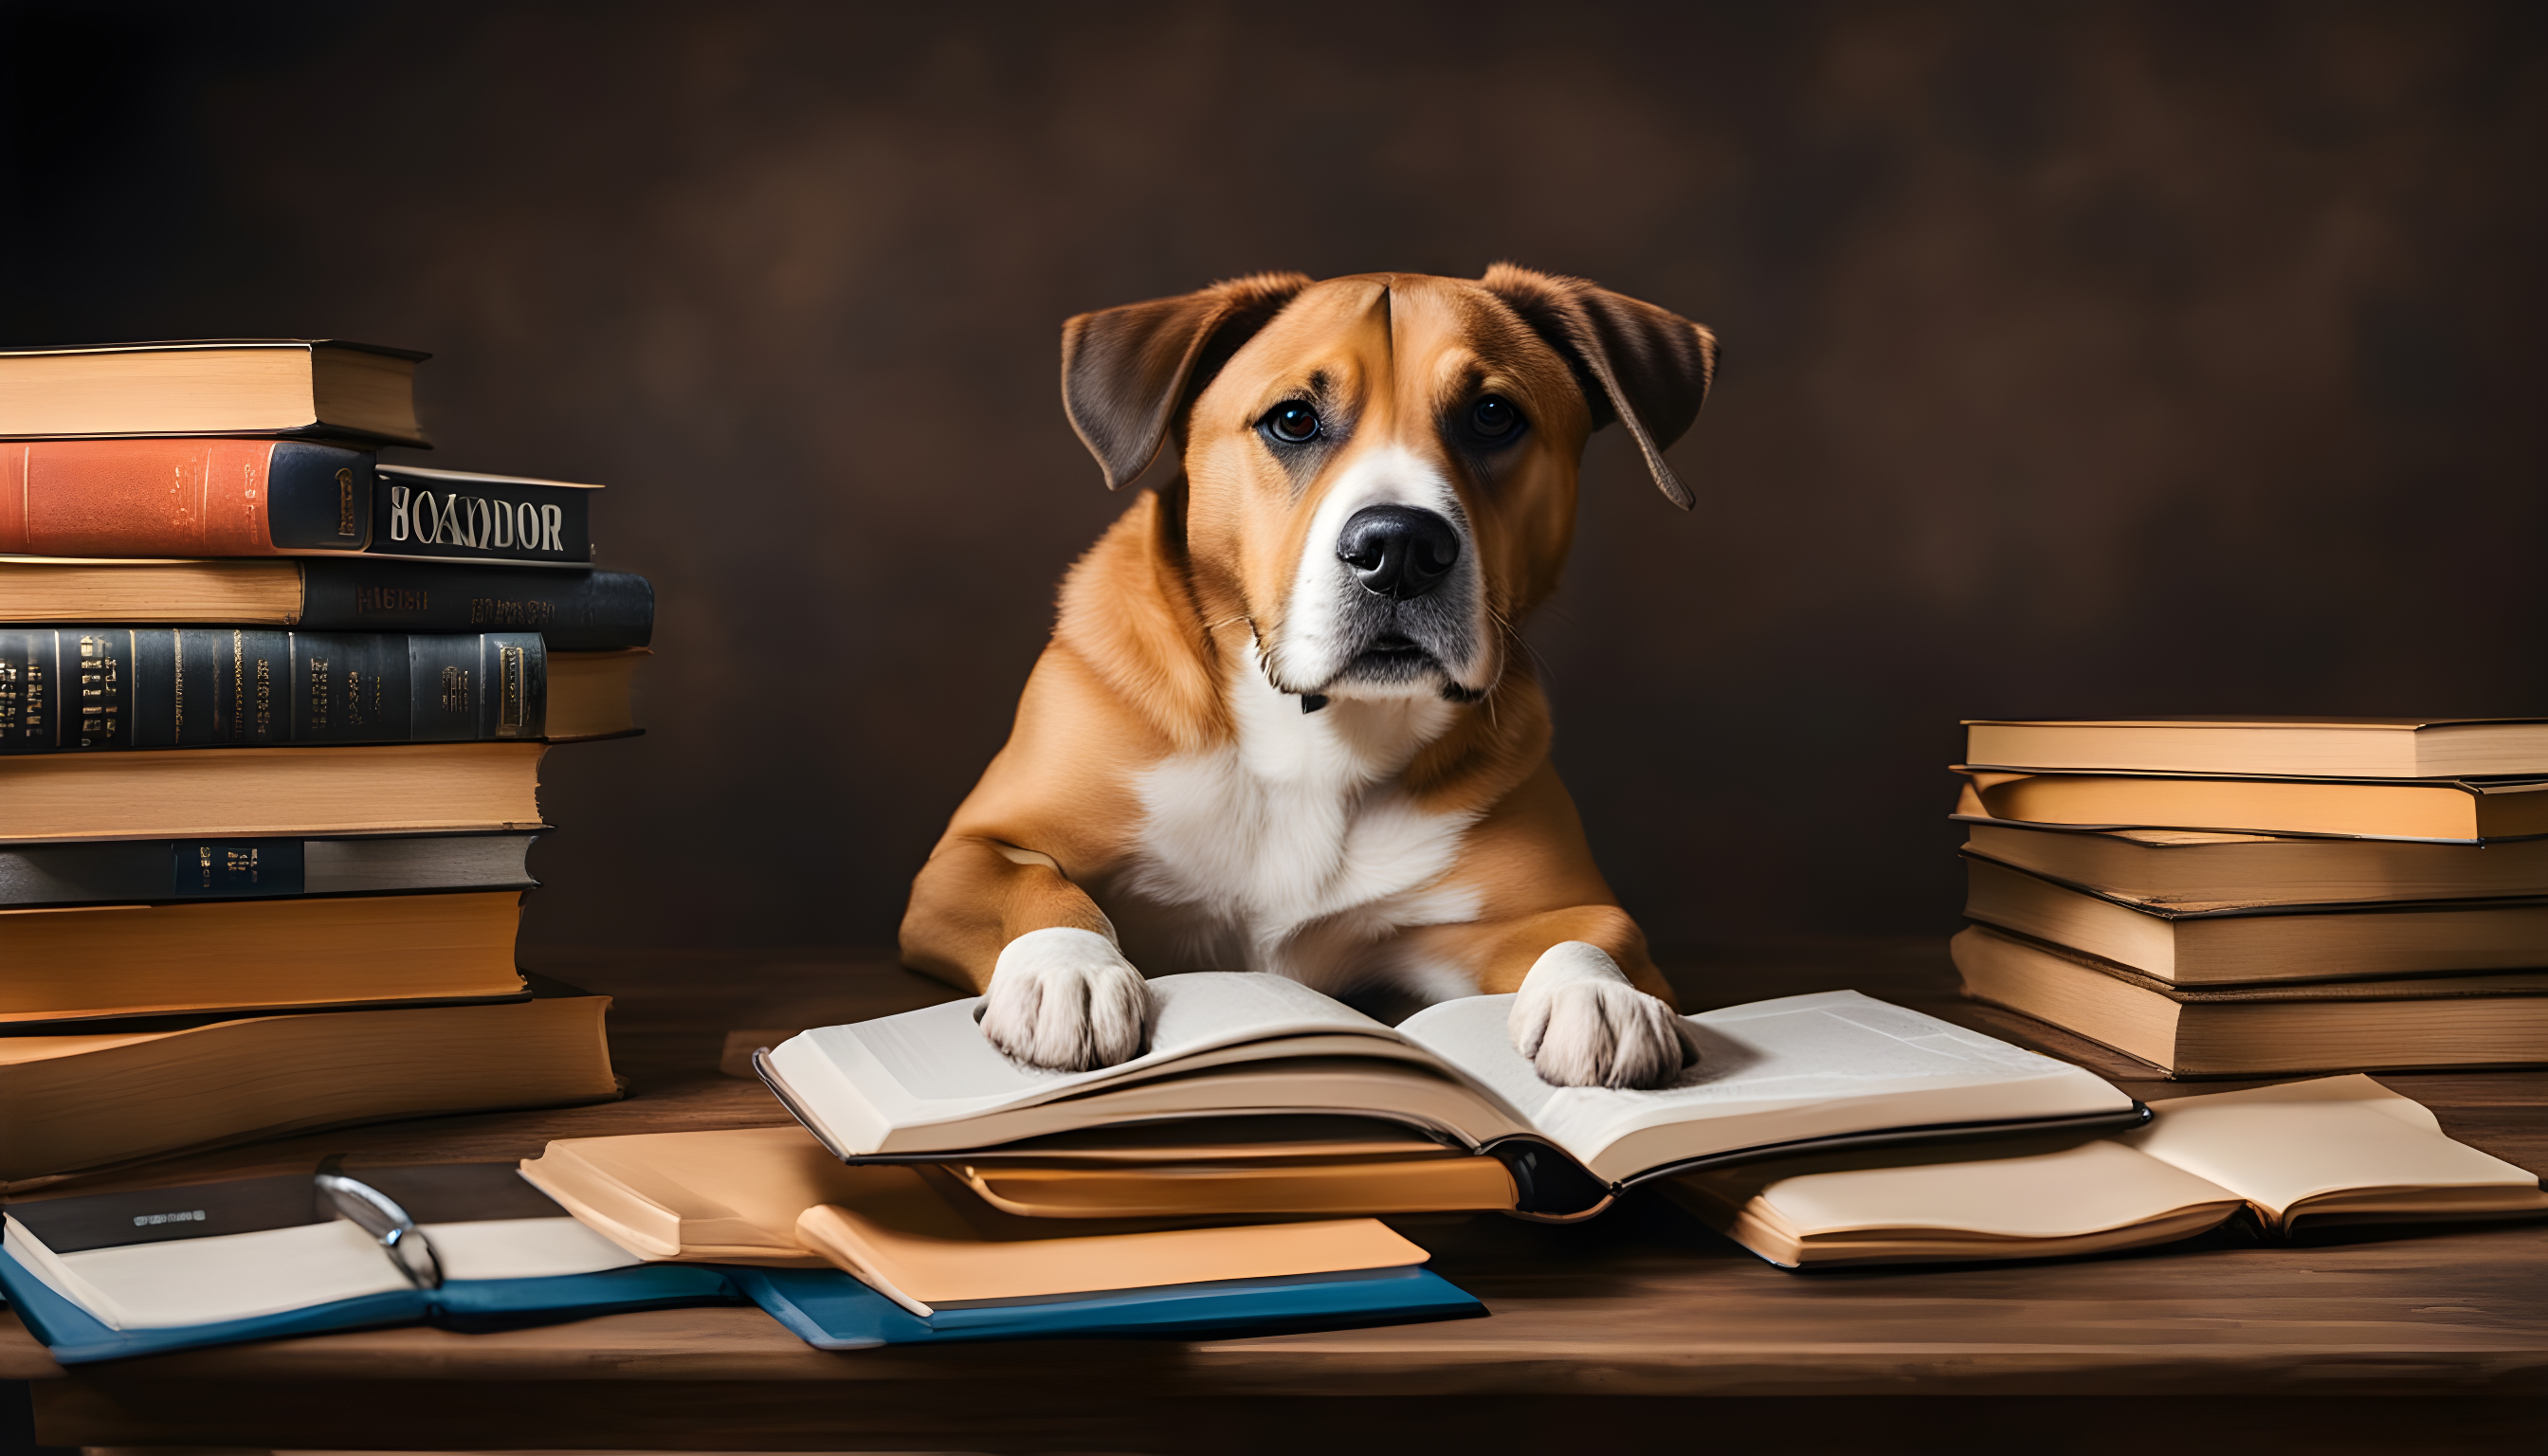 A well-read Boxador (Boxer Lab Mix) immersed in a sea of Boxador resources, including books, articles, and a laptop displaying a blog about Boxadors—talk about a pup with a passion for learning!